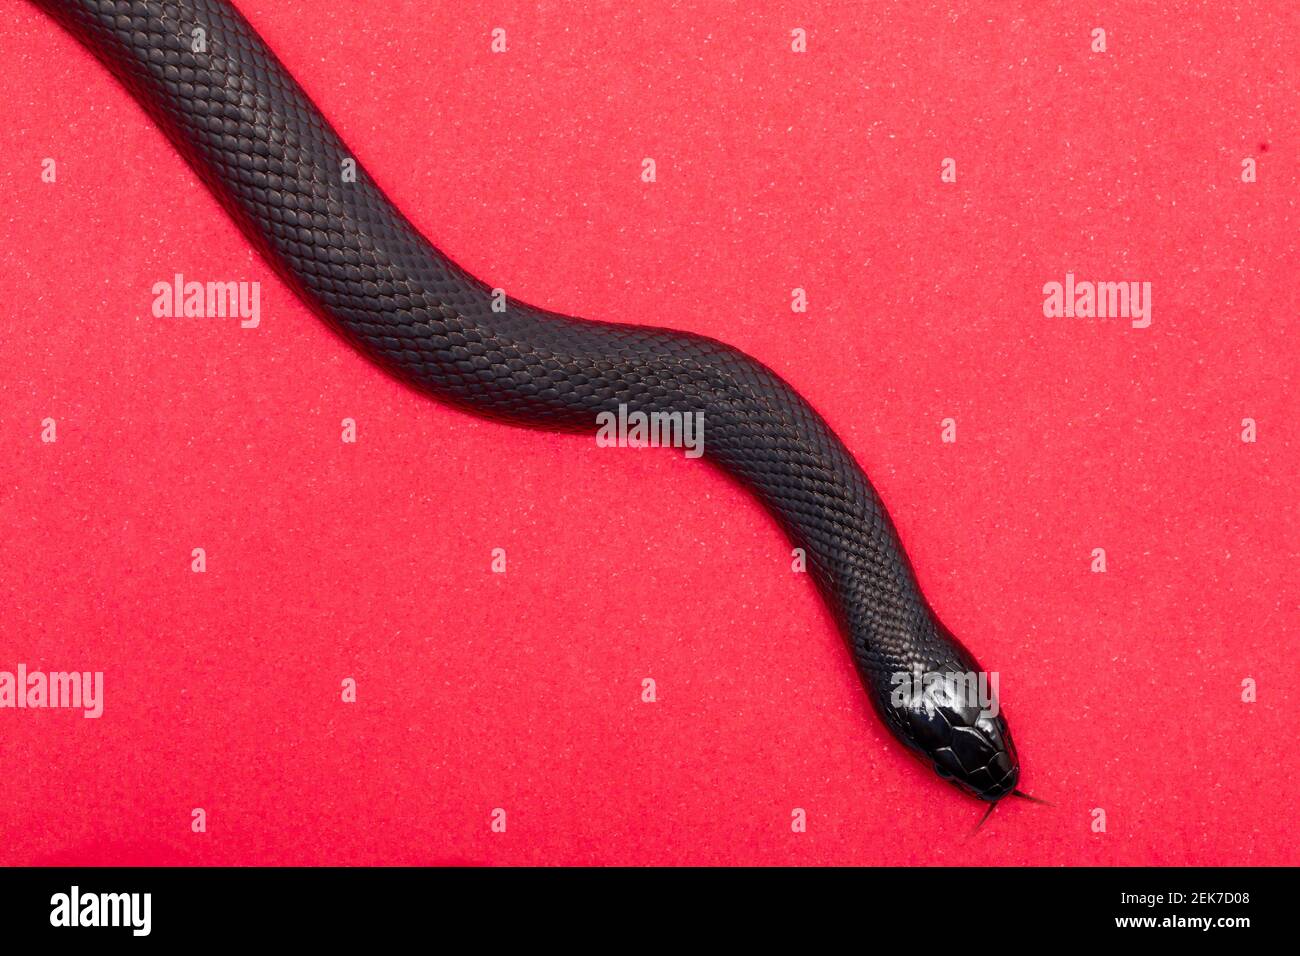 The Mexican black kingsnake (Lampropeltis getula nigrita) is part of the larger colubrid family of snakes, and a subspecies of the common kingsnake. Stock Photo